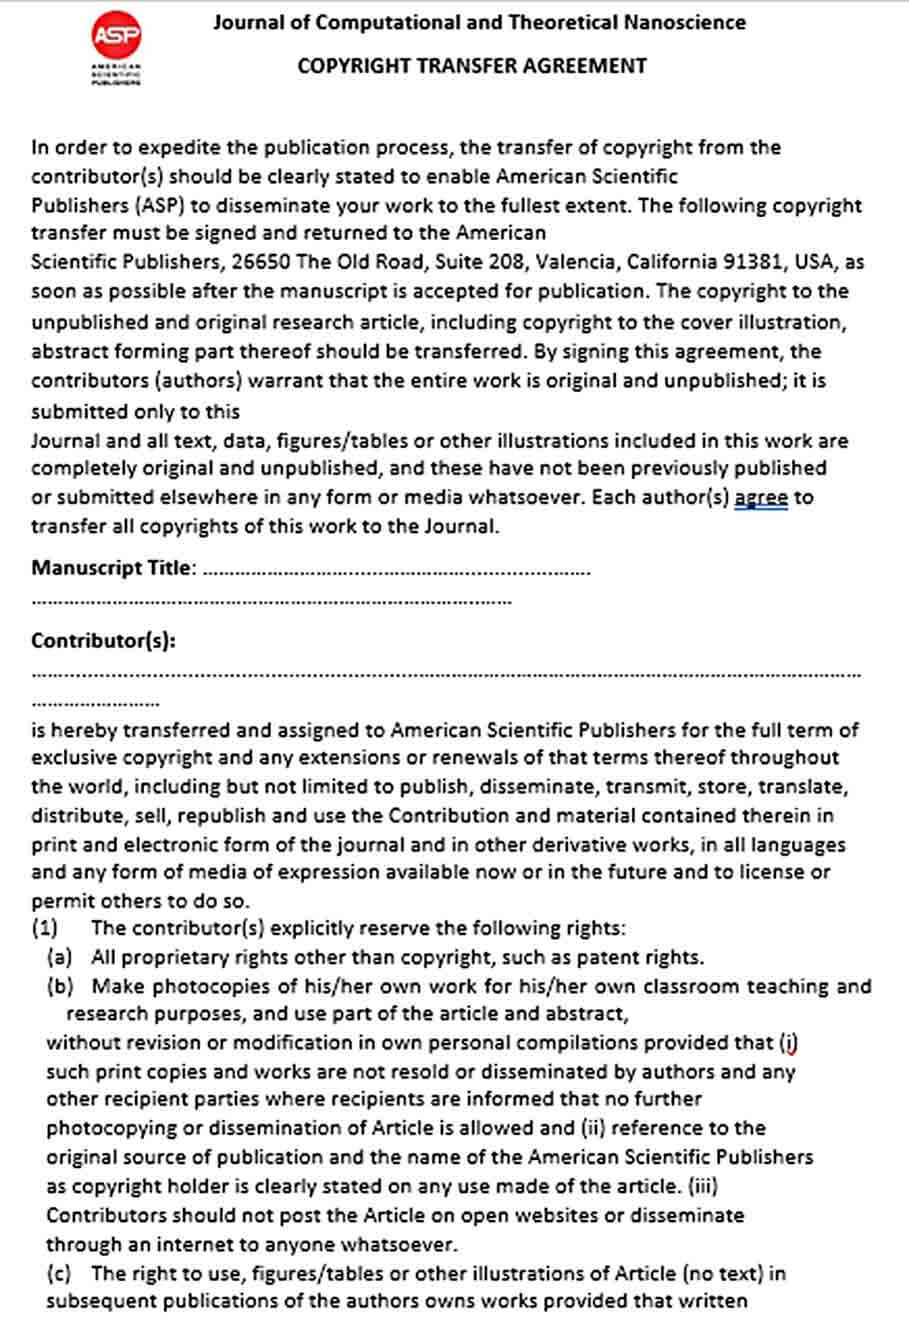 Sample Copyright Transfer Agreement Example